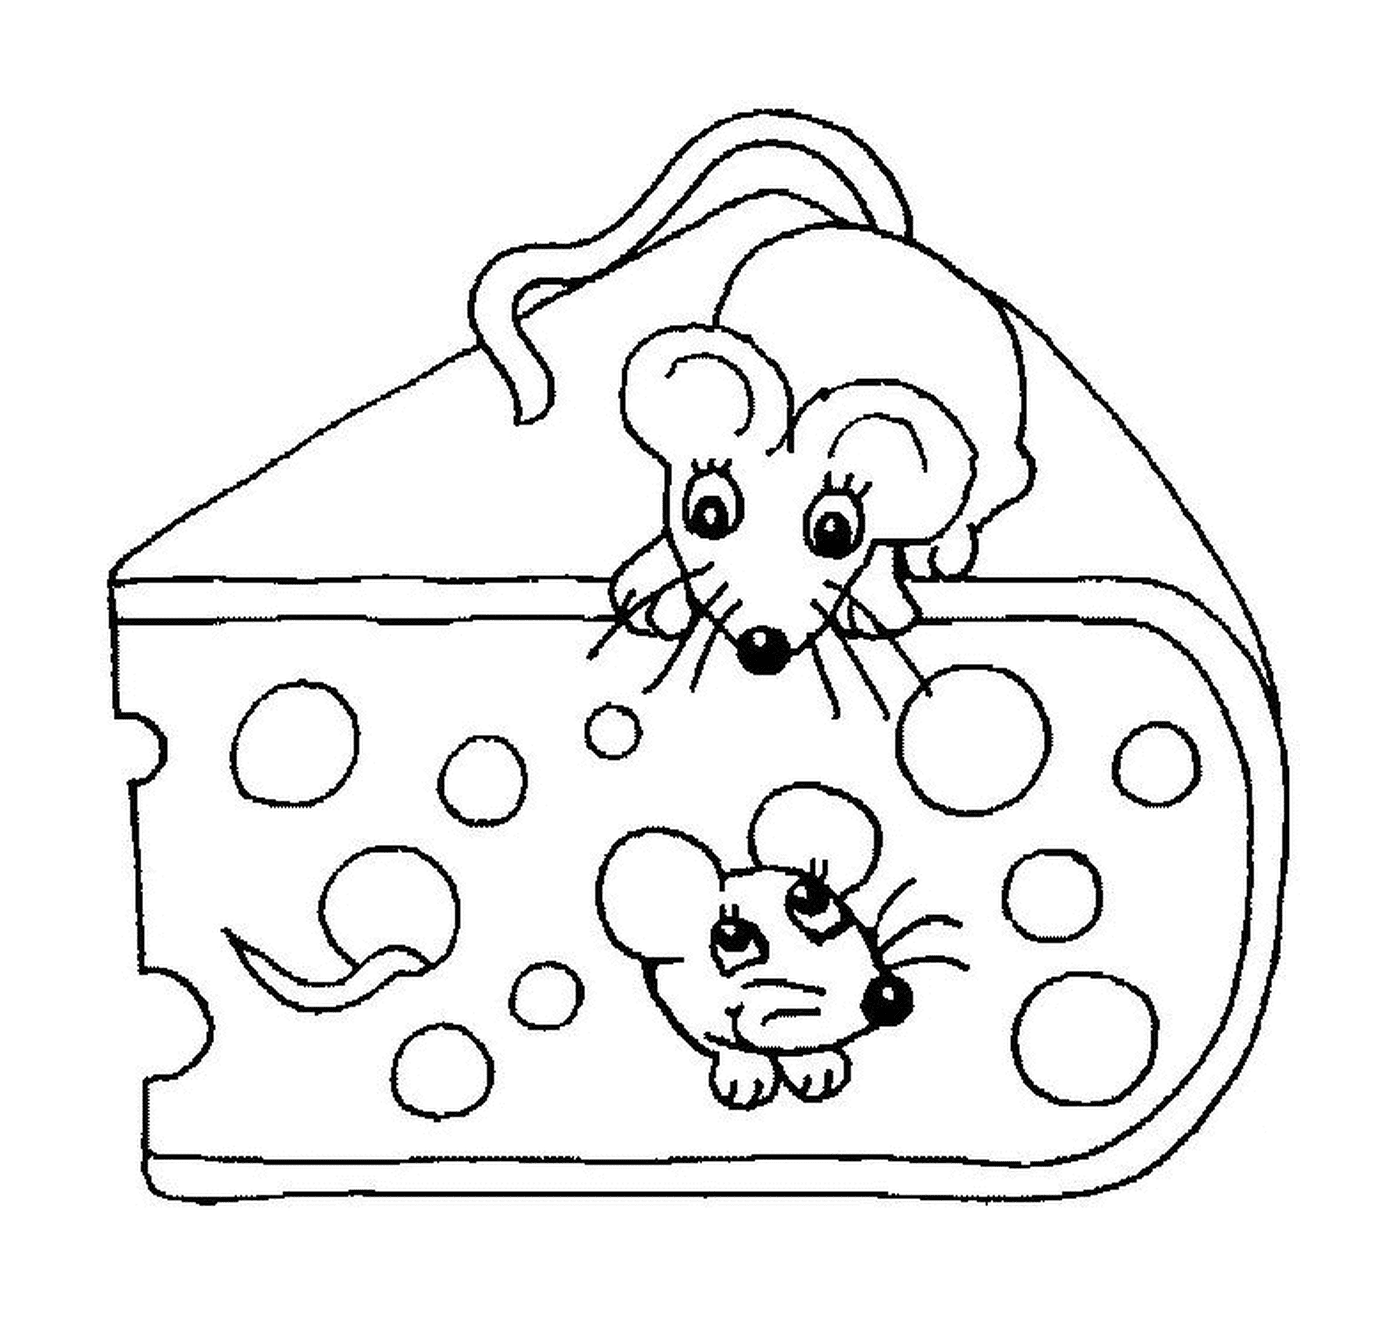  Two mice in cheese 